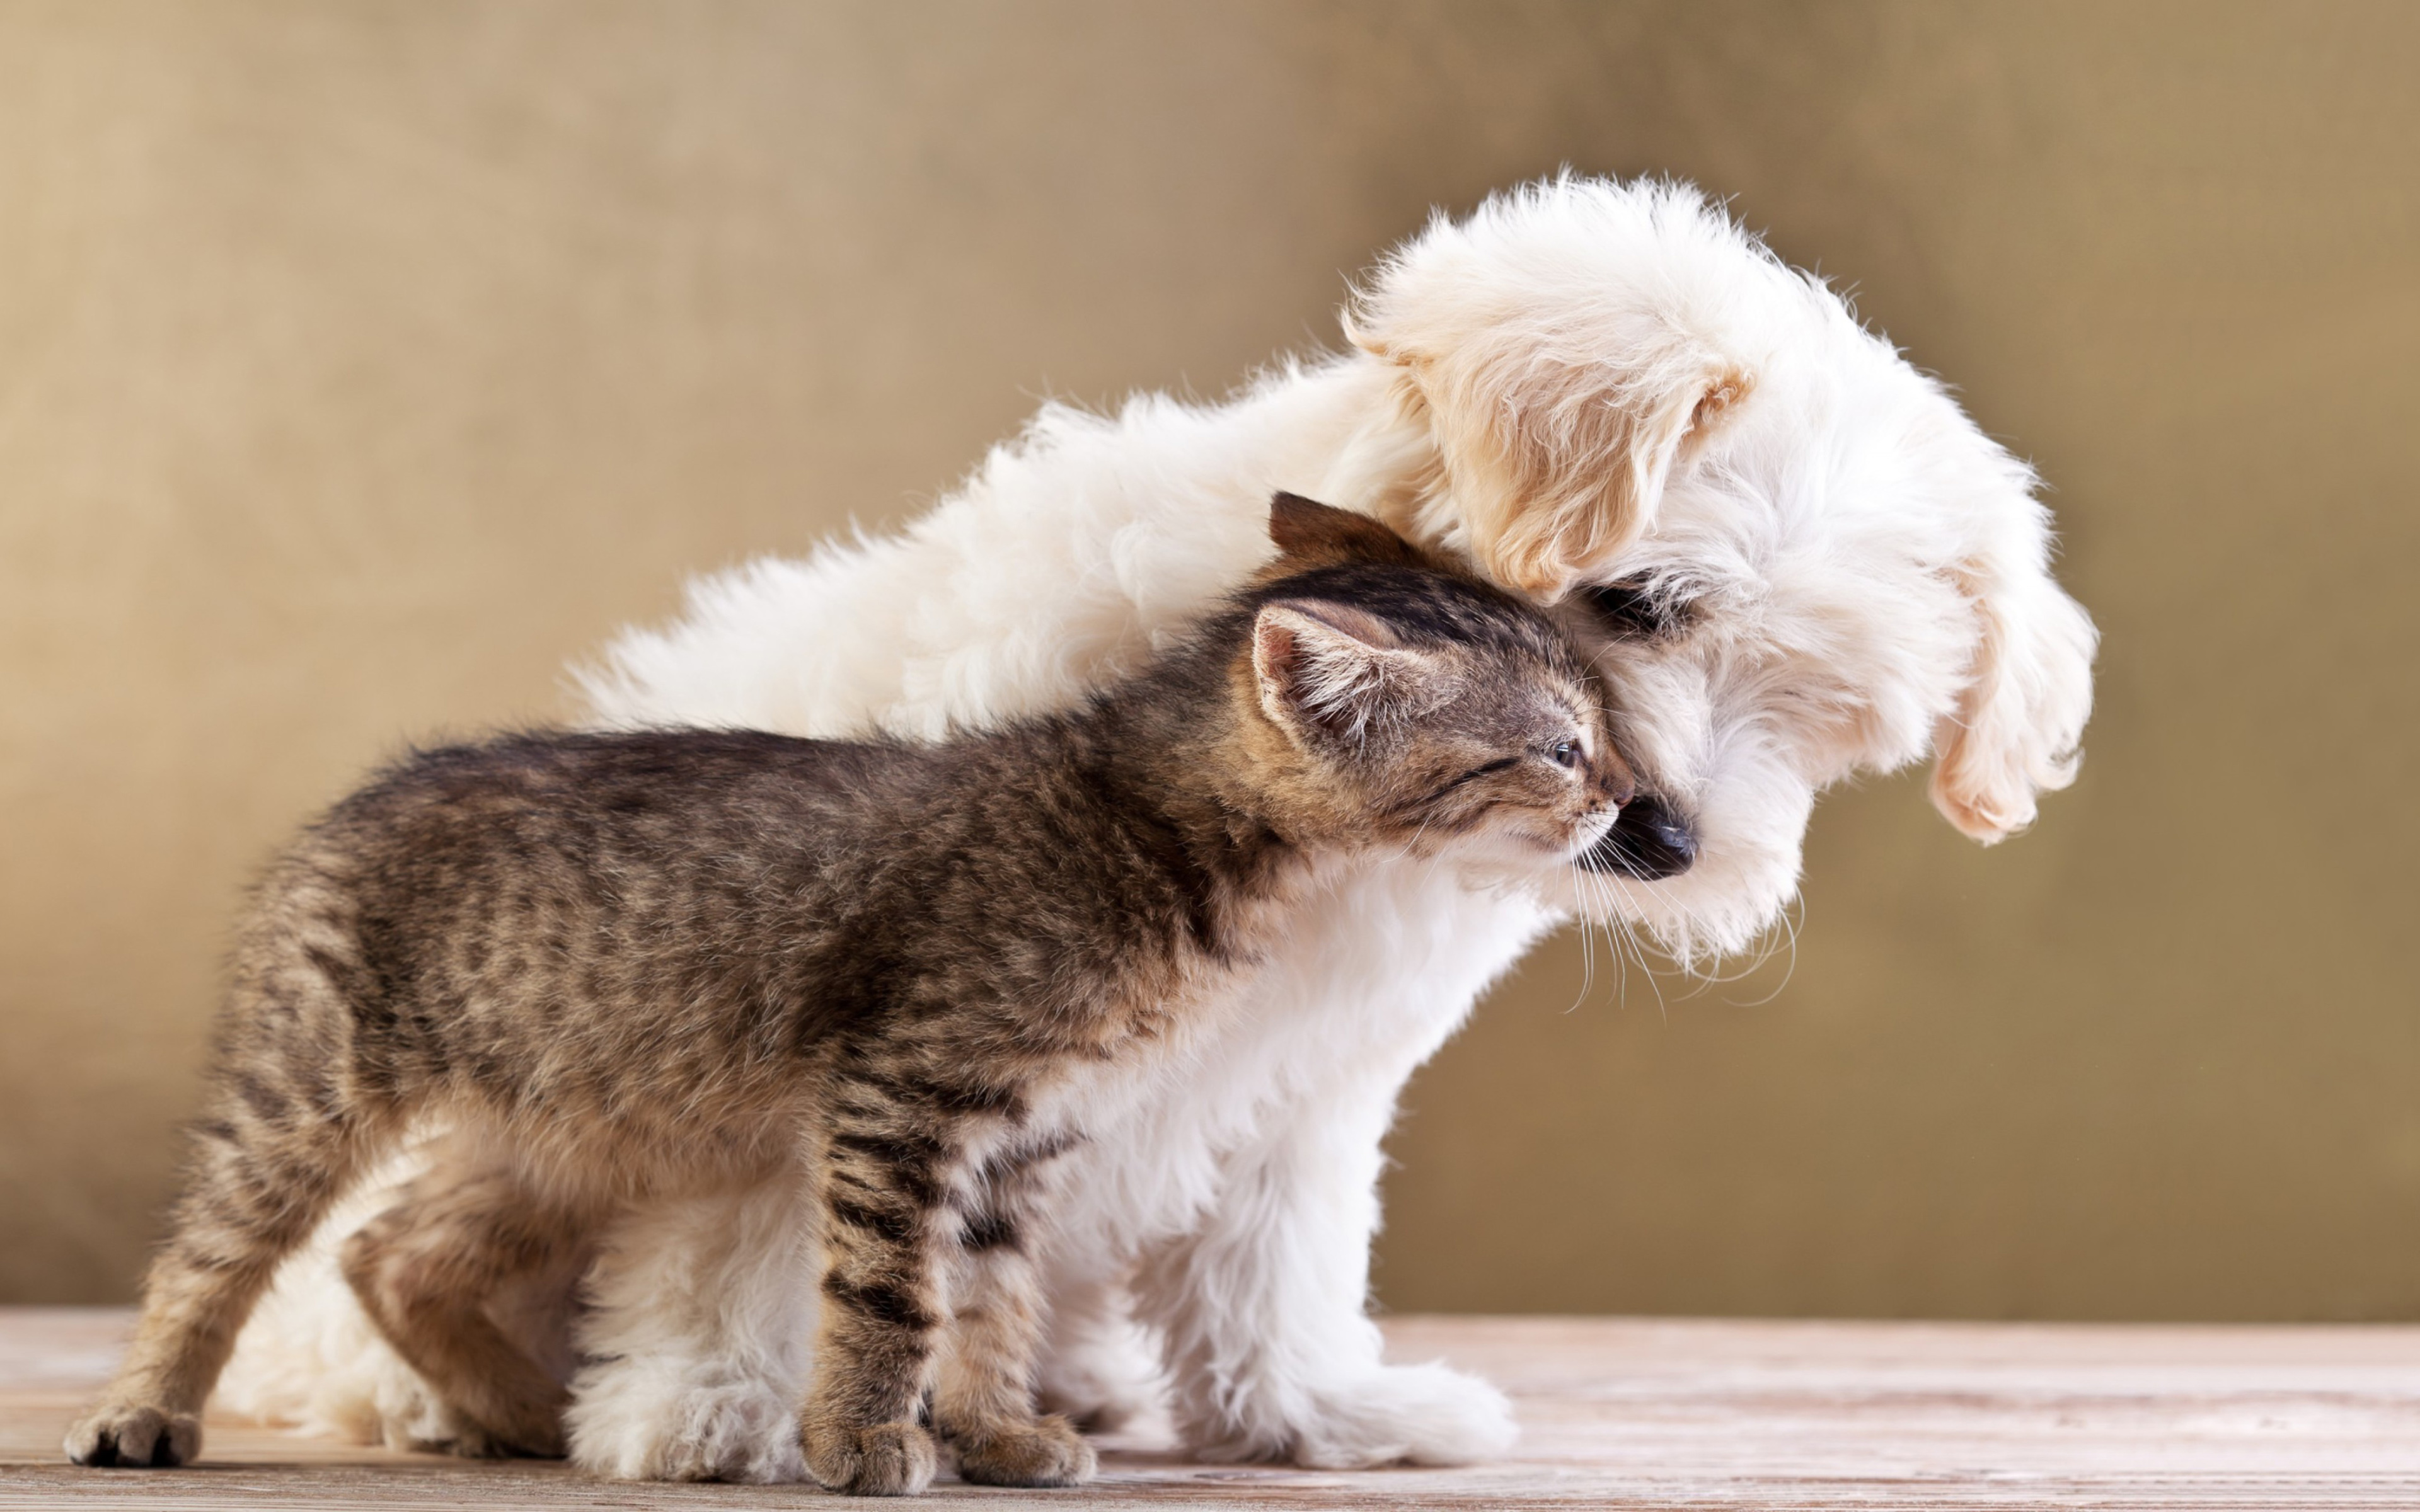 Cat And Dog Mobile Wallpaper Hd : Wallpapers13.com